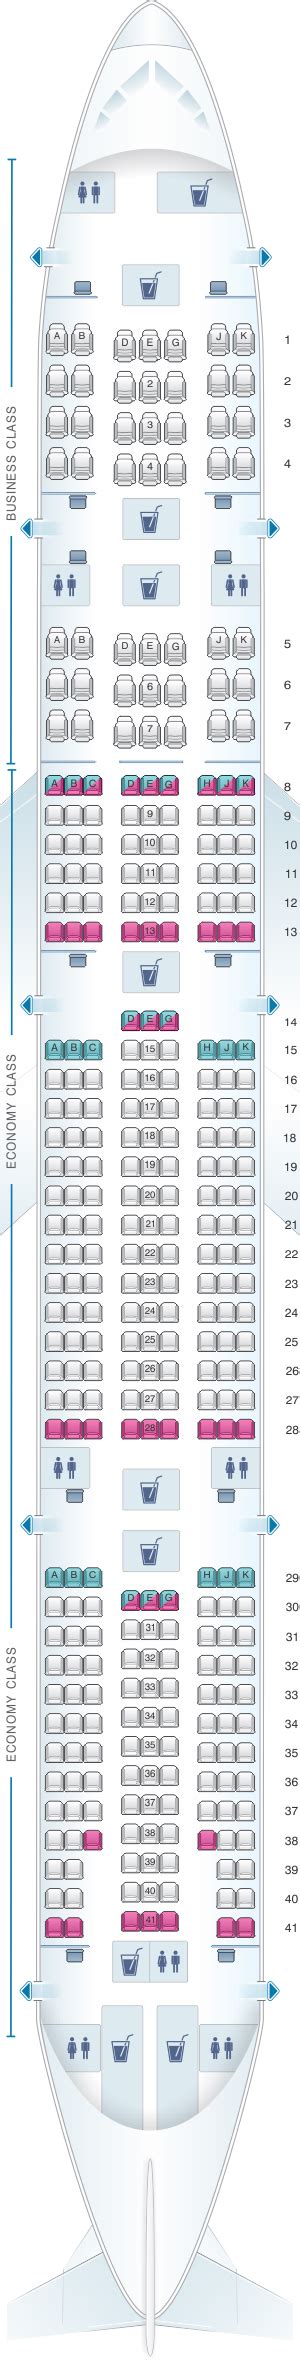 boeing 777 300er turkish airlines seat map